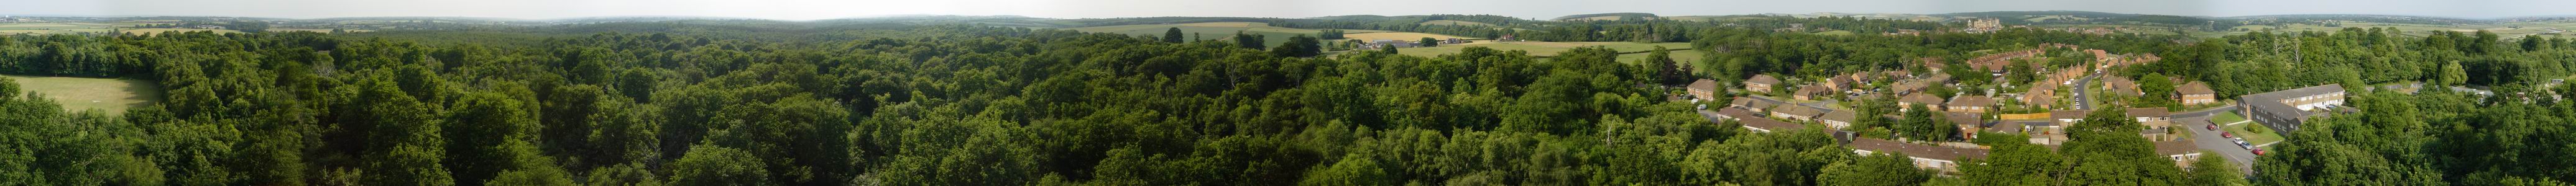 360 degree tree top panorama of countryside to be trashed